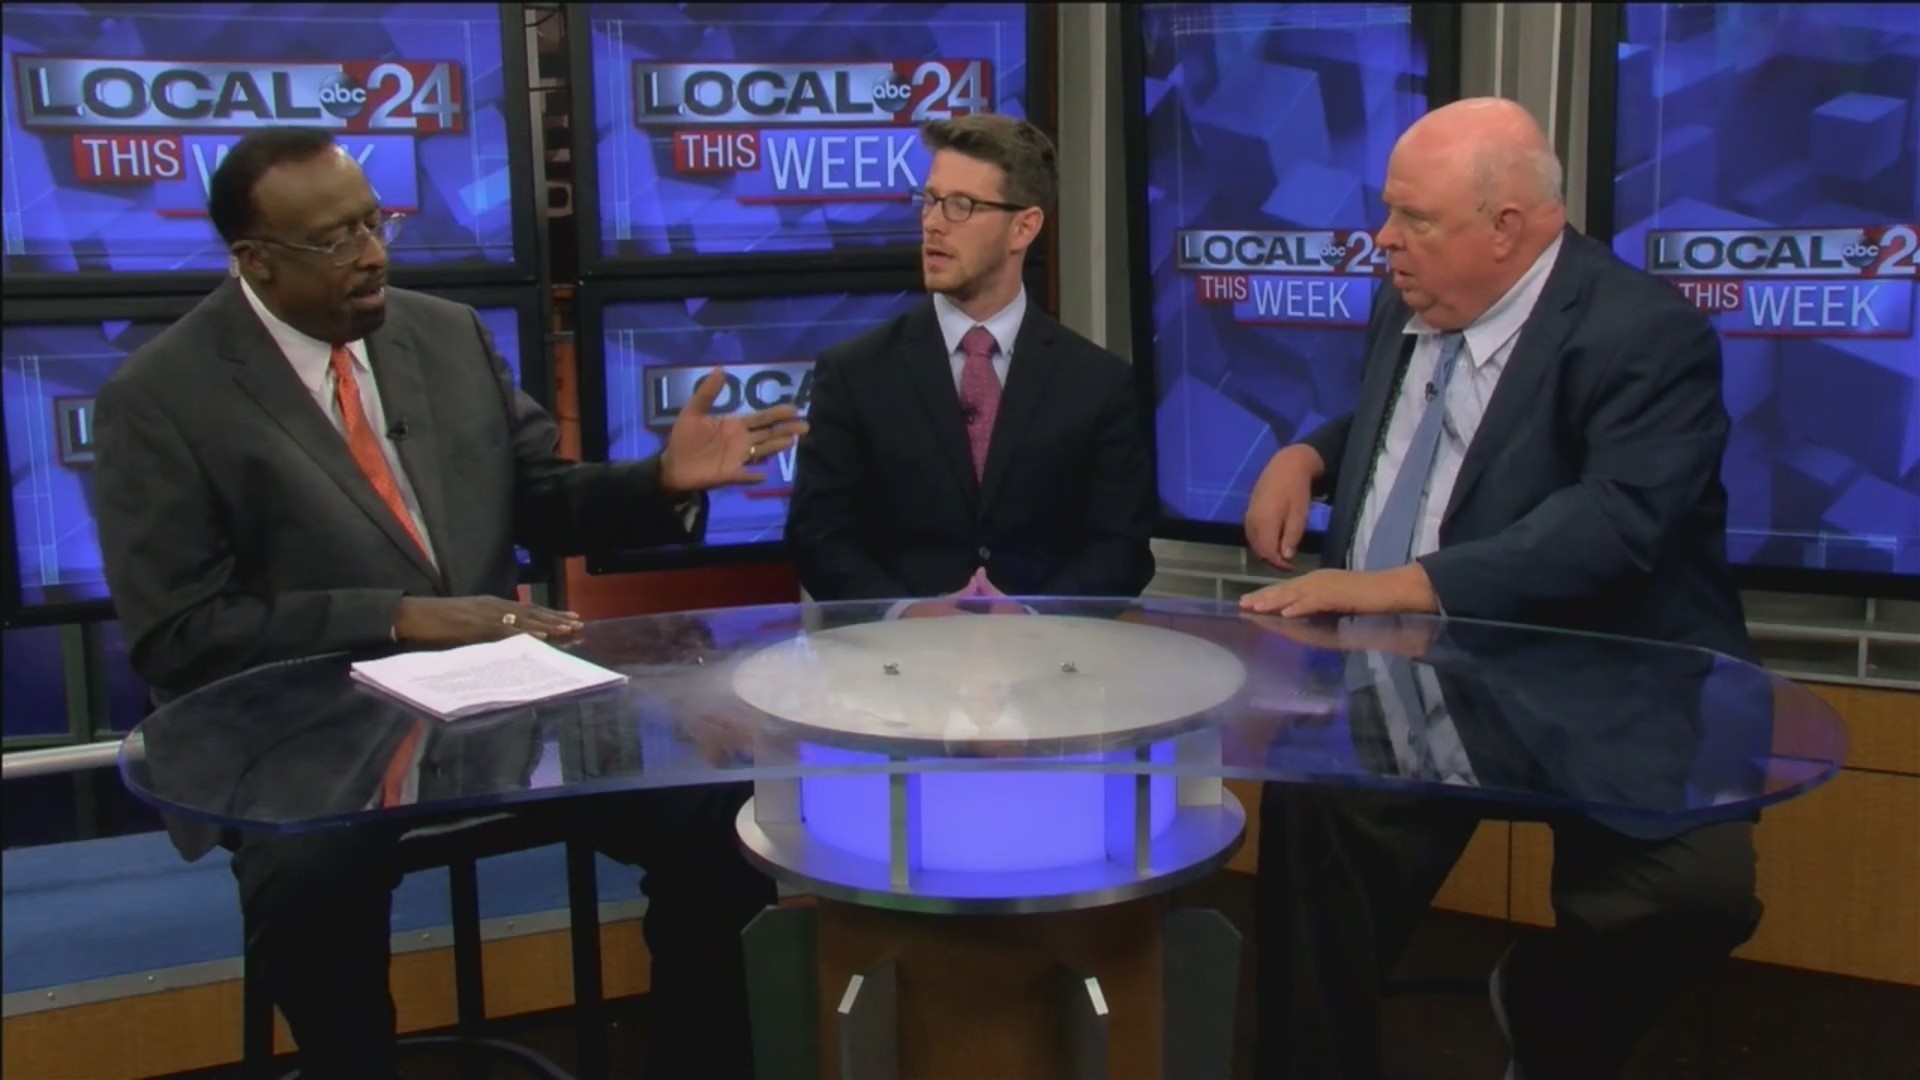 Local 24 This Week 10/13/2019